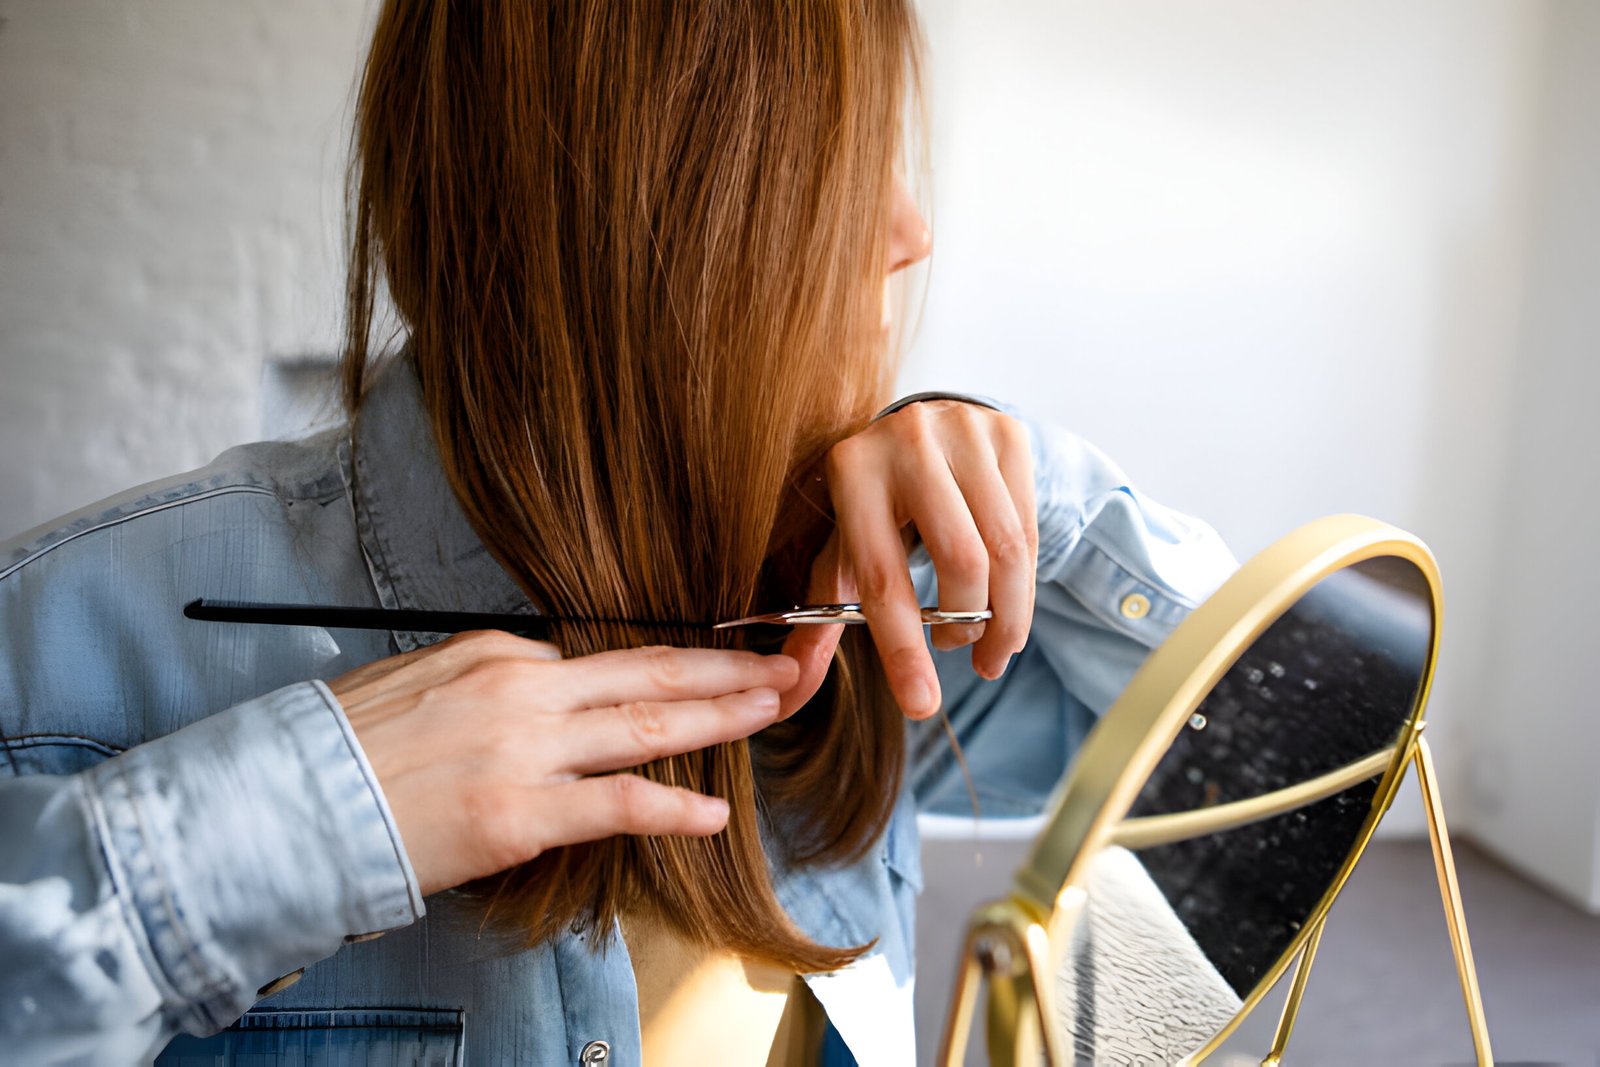 How to Cut Curtain Bangs: A Step-by-Step Guide